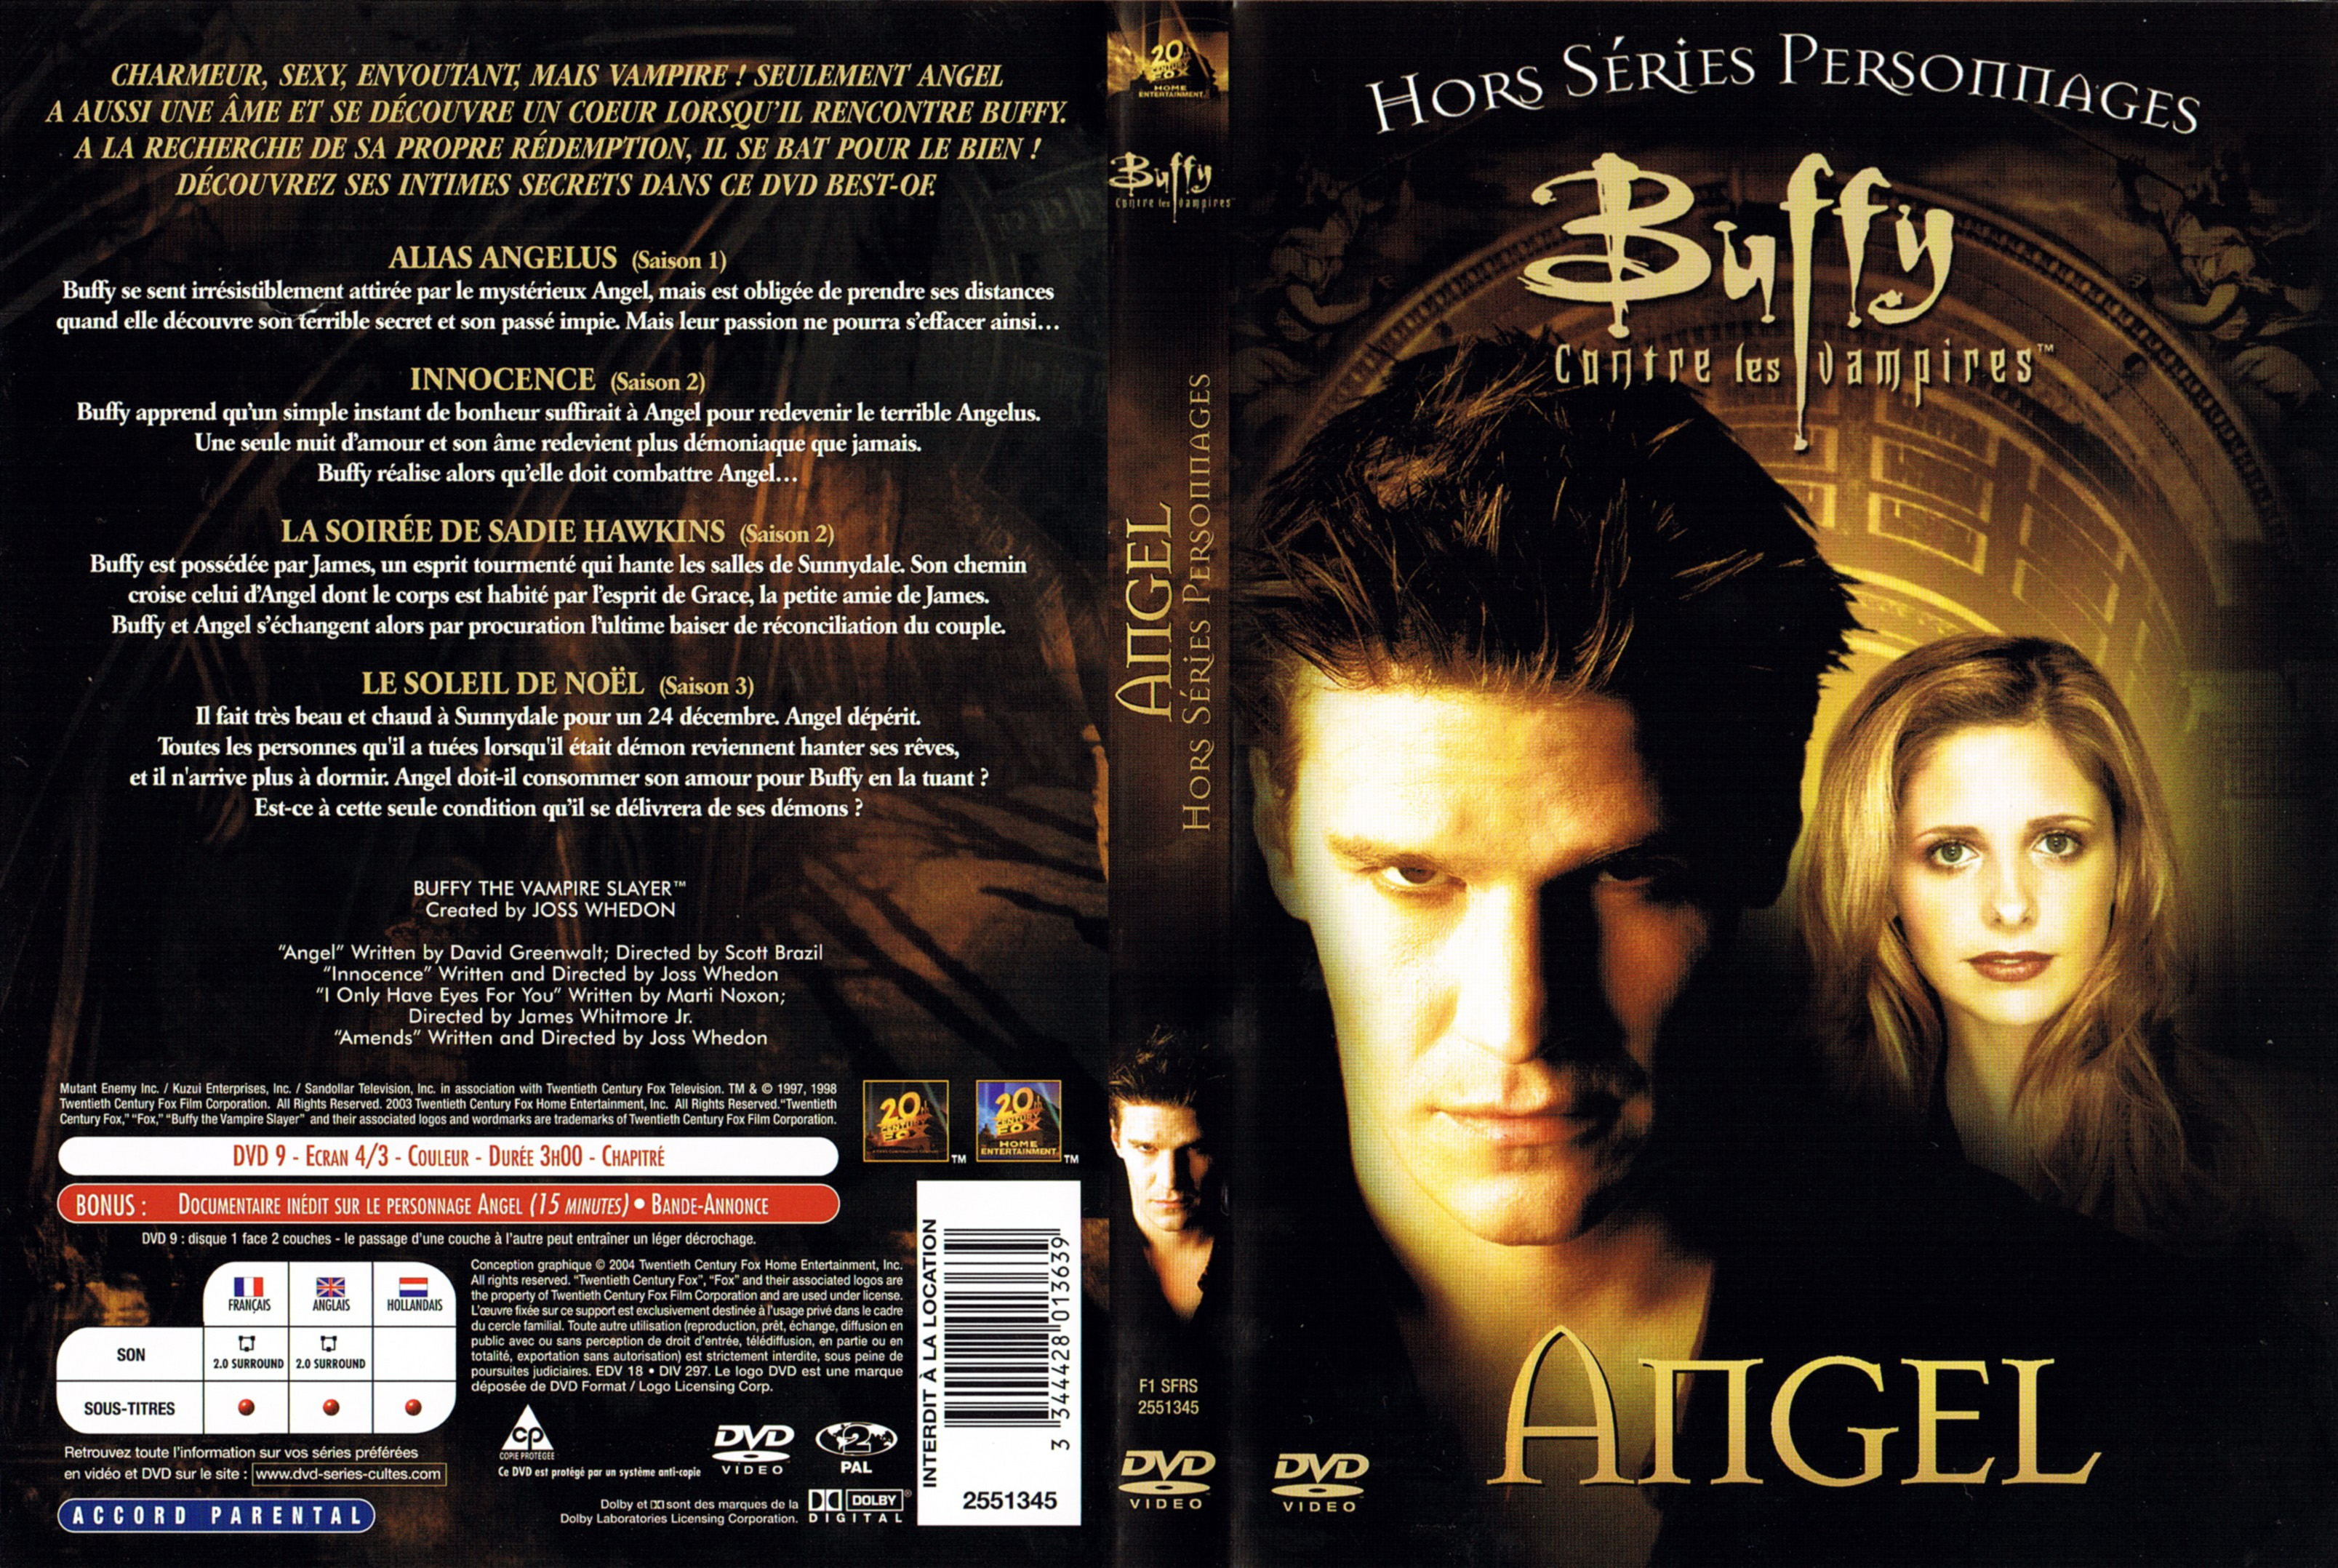 Jaquette DVD Buffy contre les vampires Special Angel